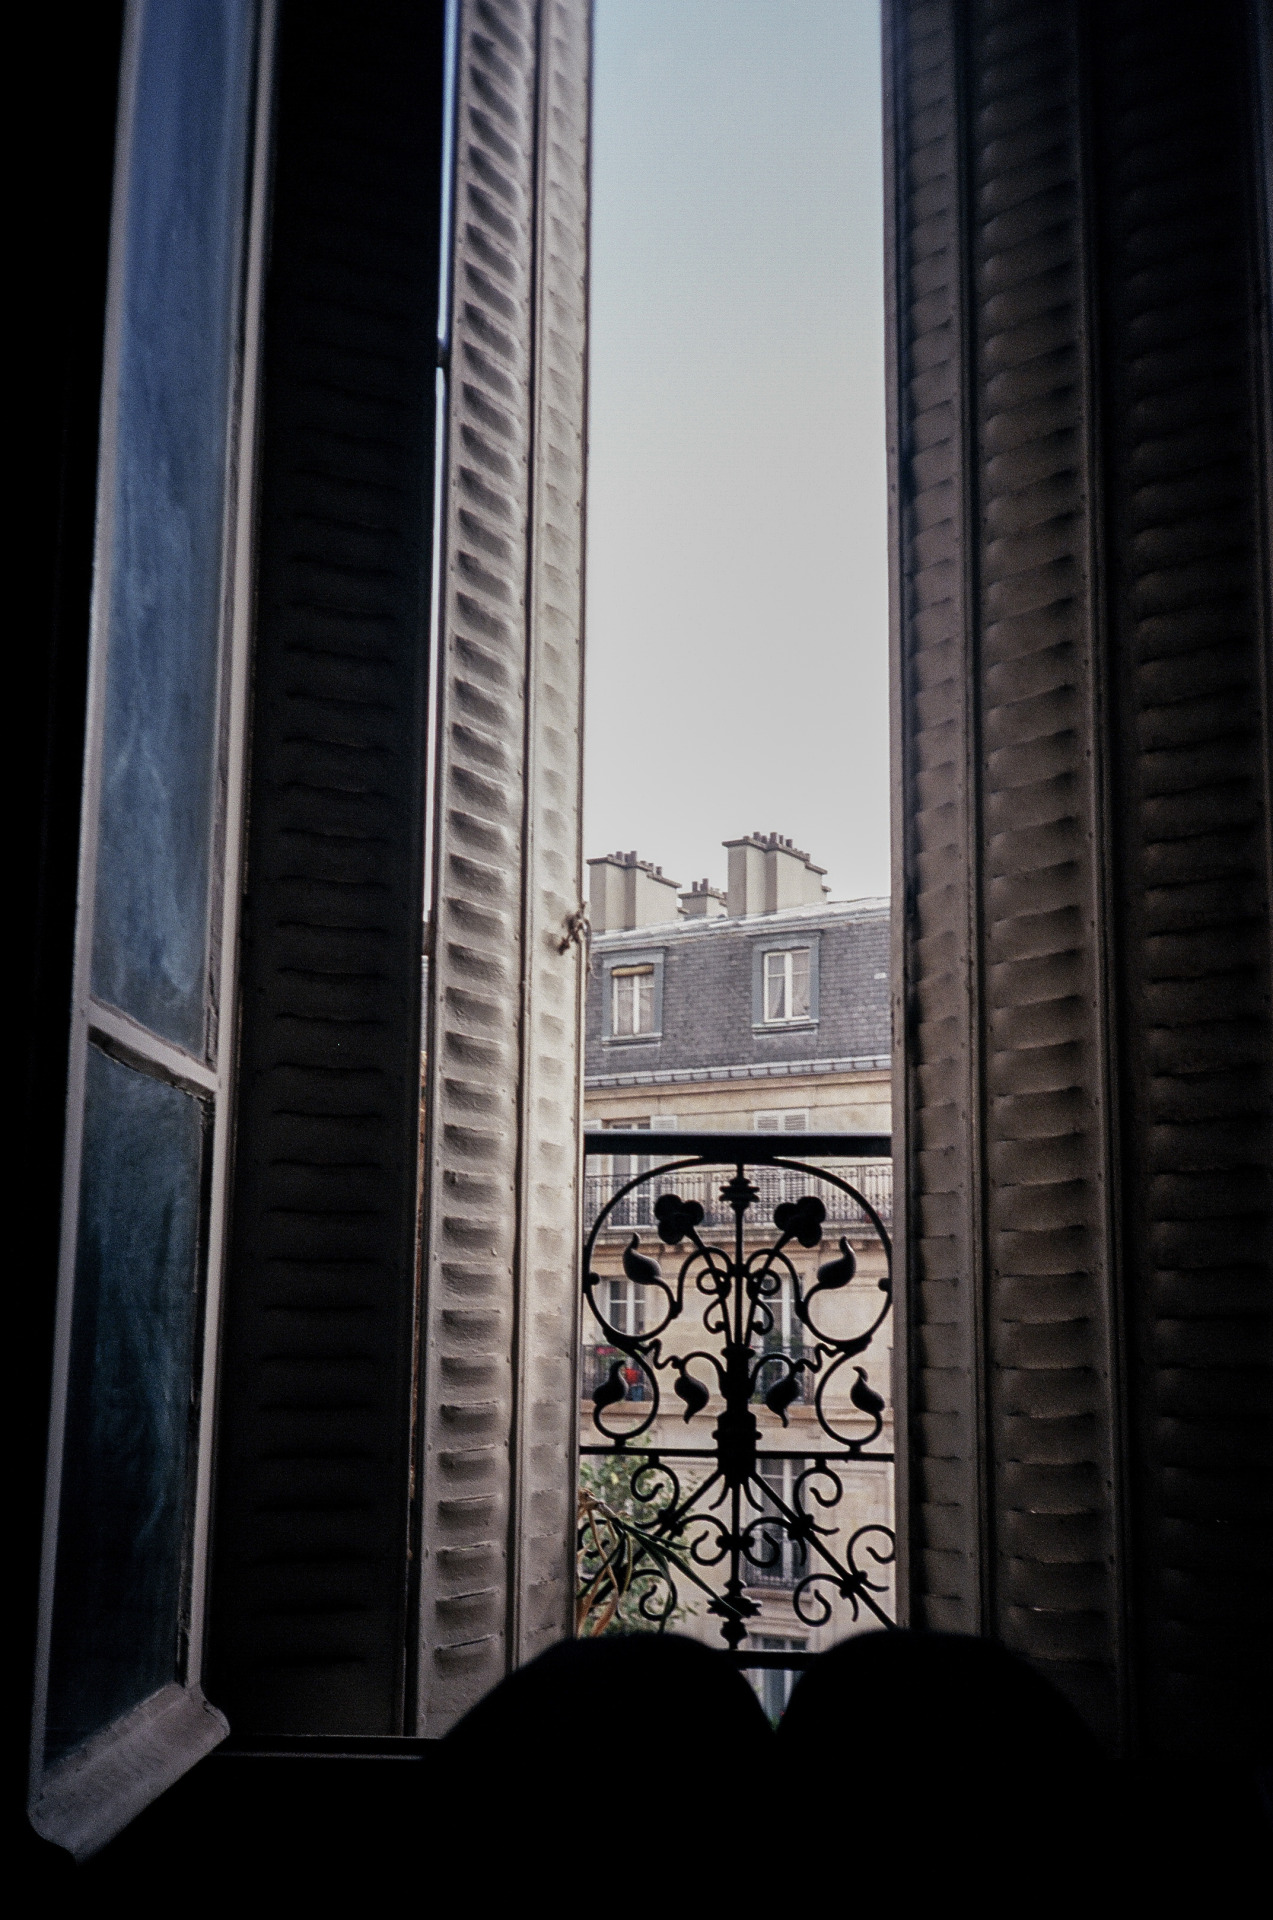 Paris - Early October 2014 - More @ https://highschoolpoppers.com